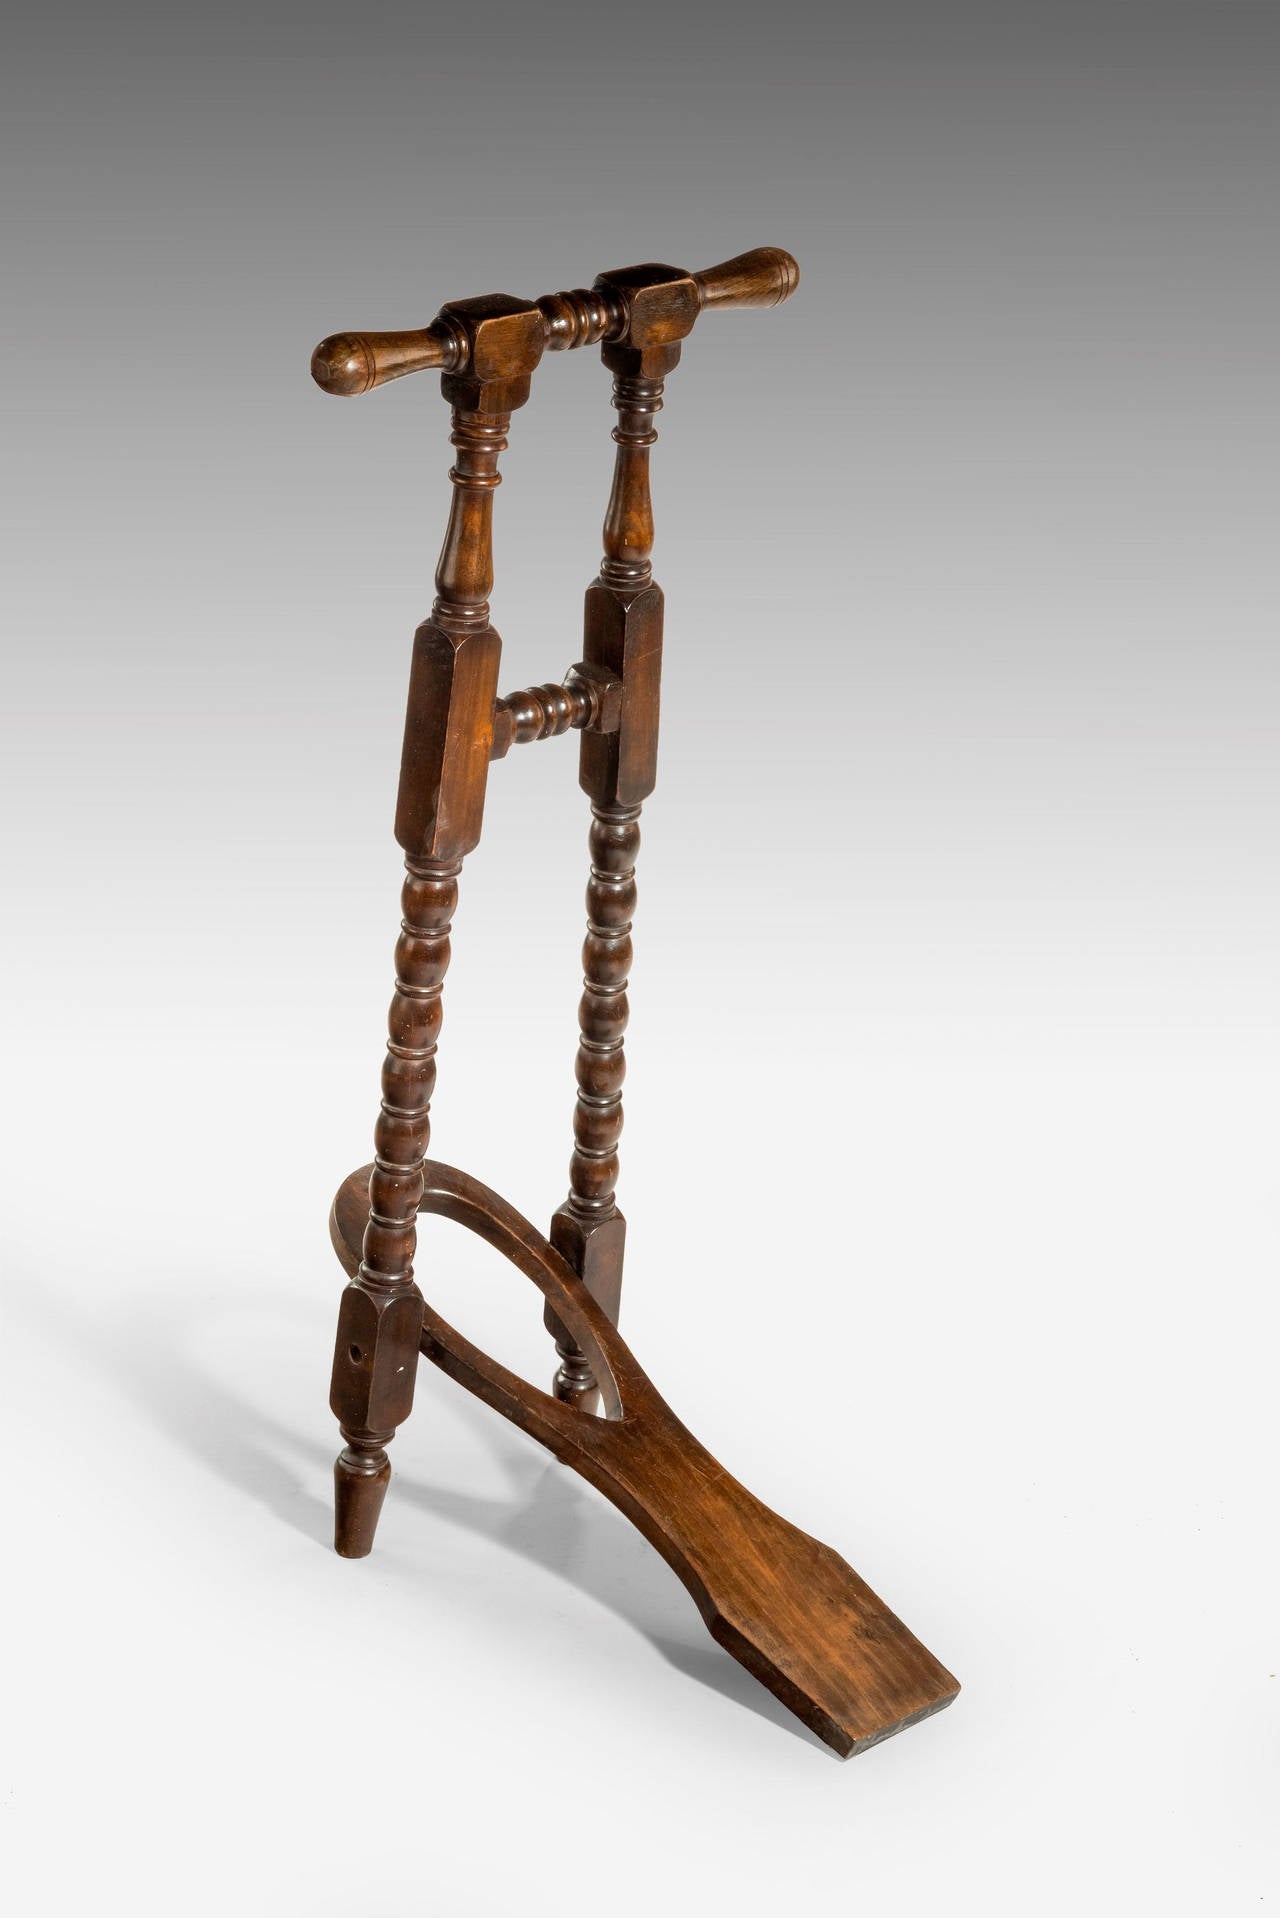 A mahogany boot jack with well carved central sections. Good overall condition.